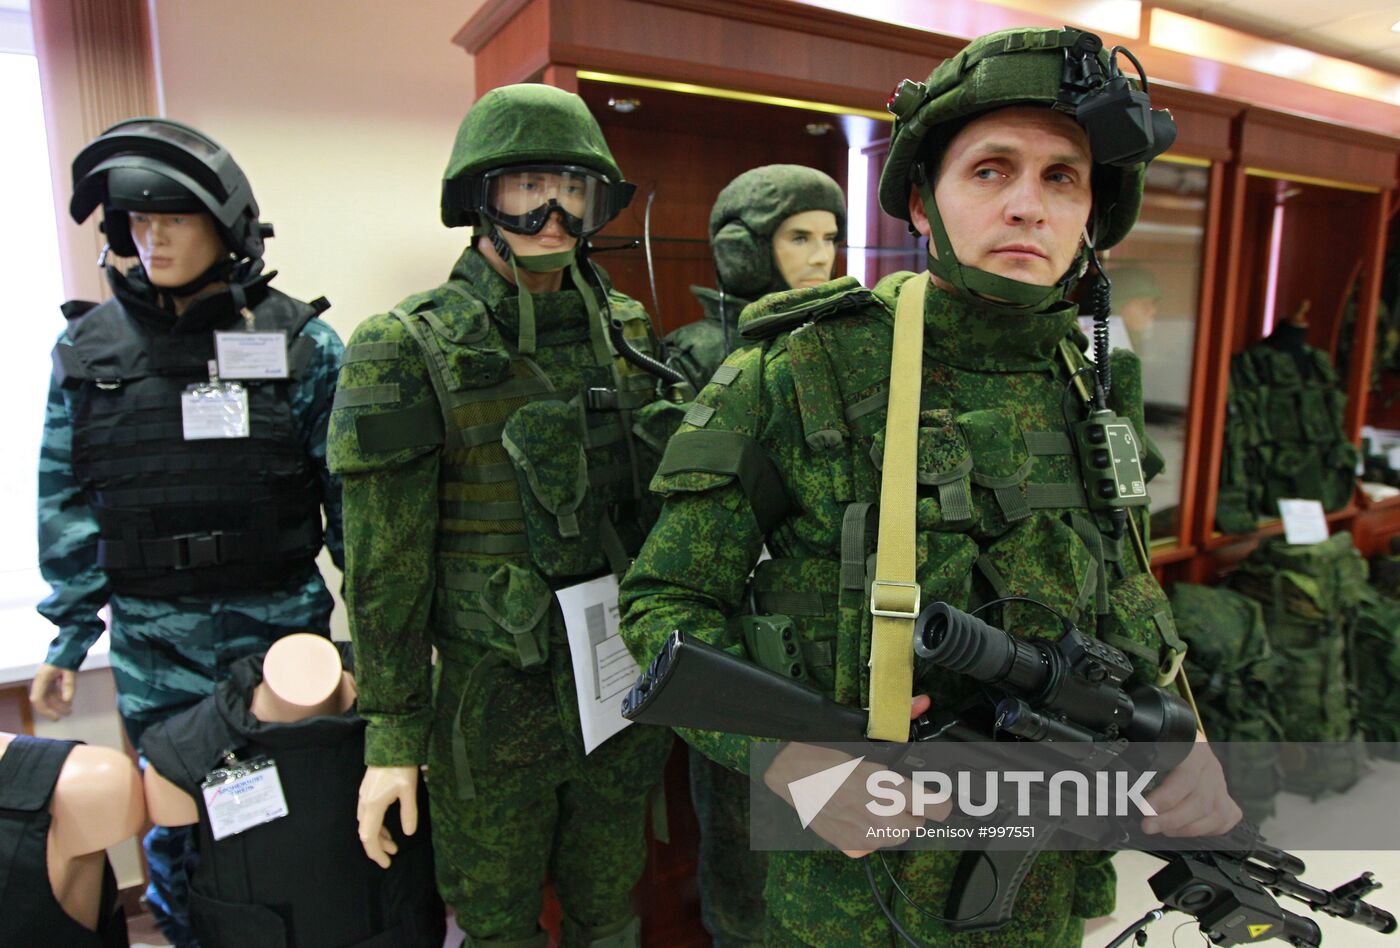 Demonstration of equipment kit for "Soldier of the Future"